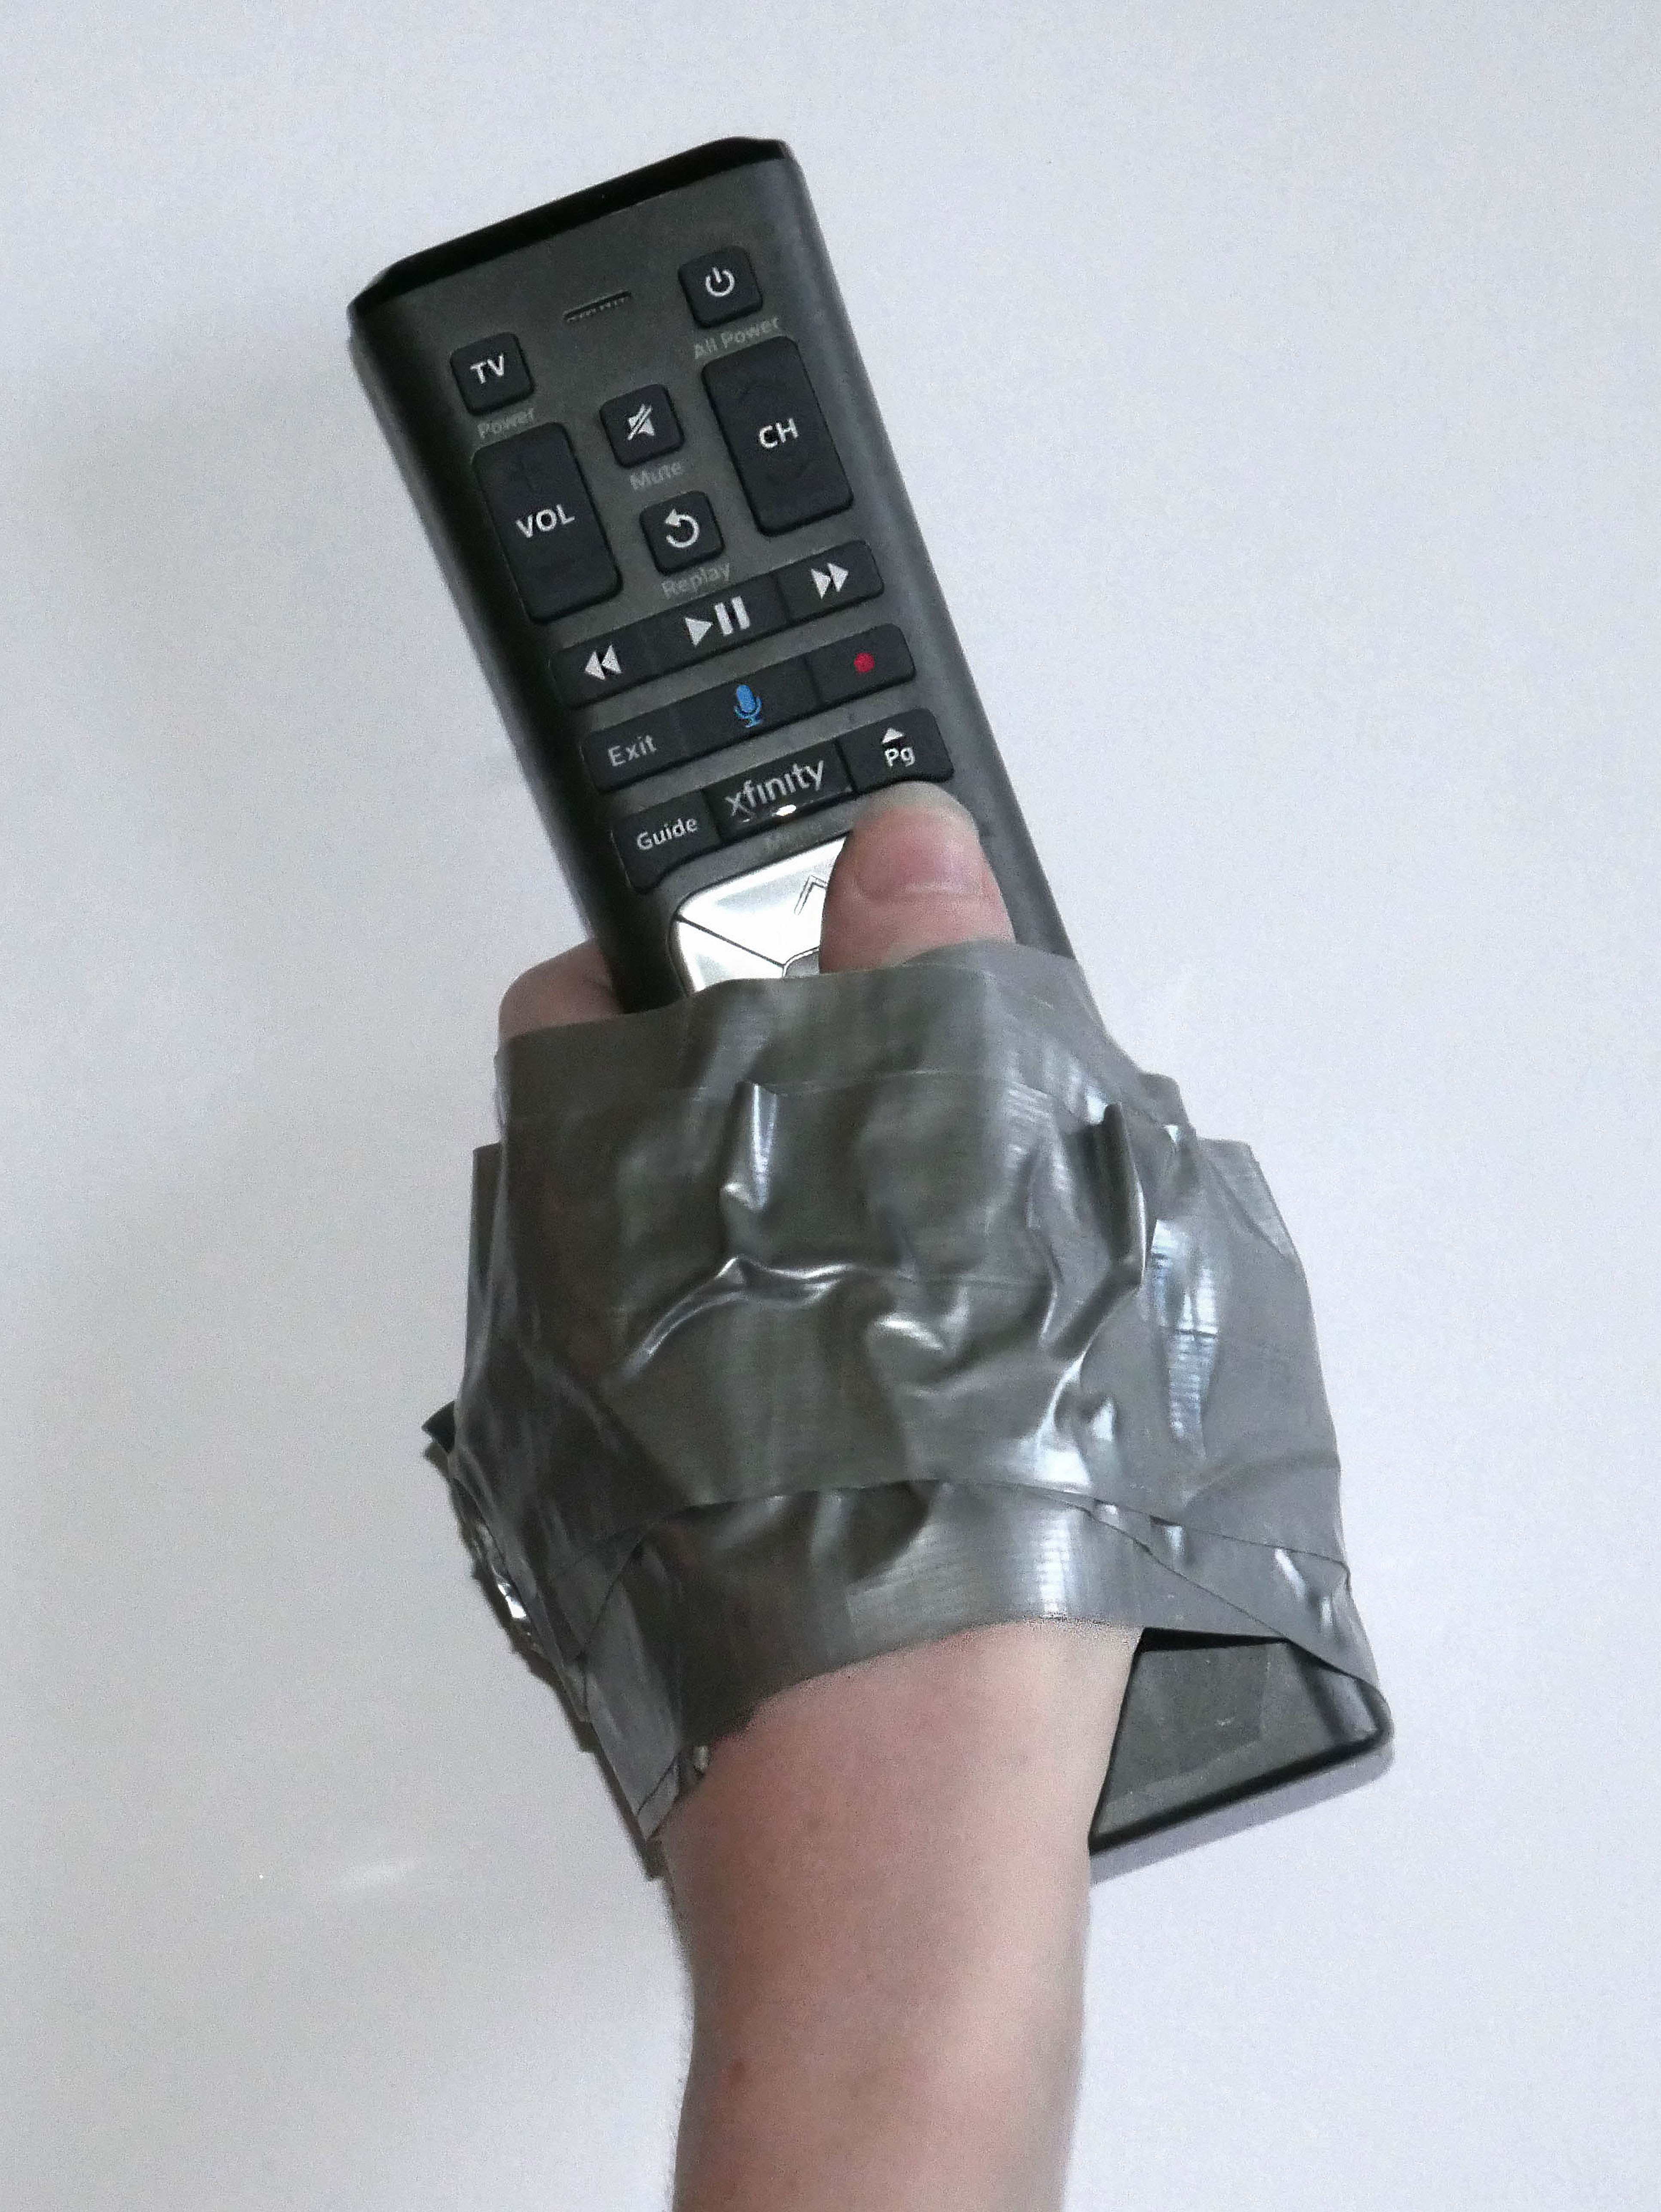 Photograph of a human hand duct taped to a television remote control.